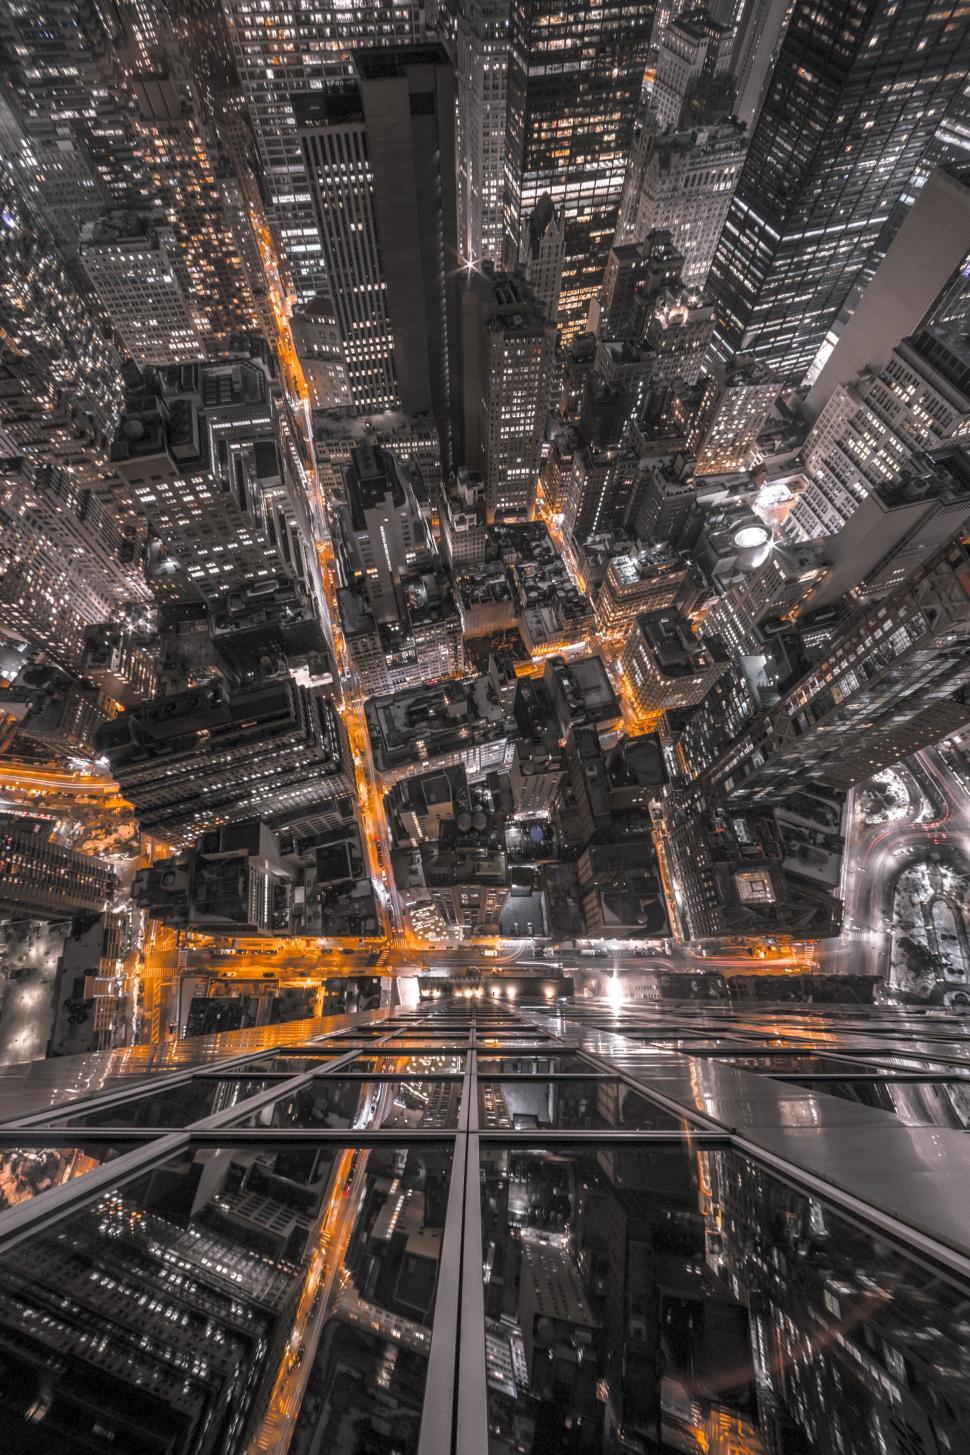 Free Image of High Angle View of City Buildings With Lights  